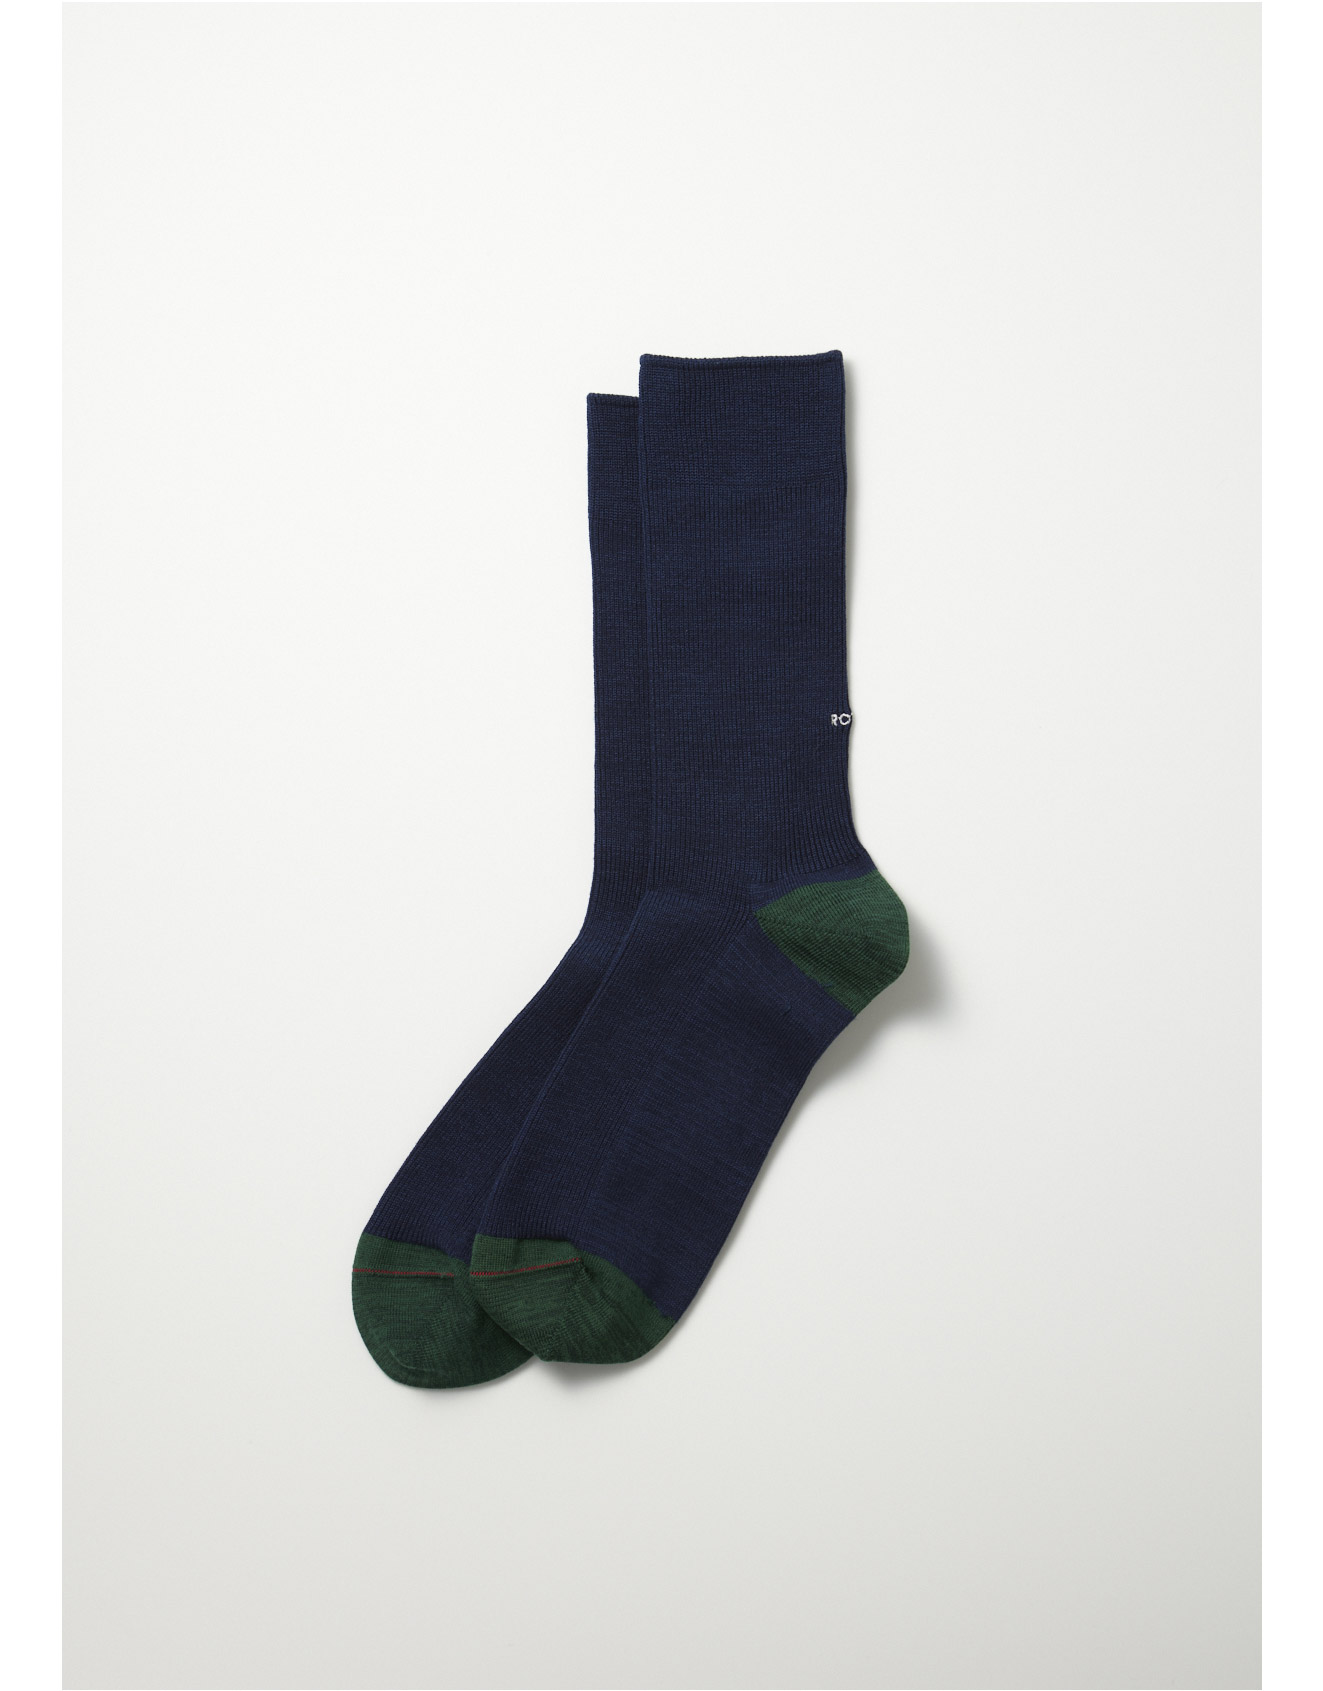 RoToTo – Organic Cotton & Recycled Polyester Ribbed Crew Socks